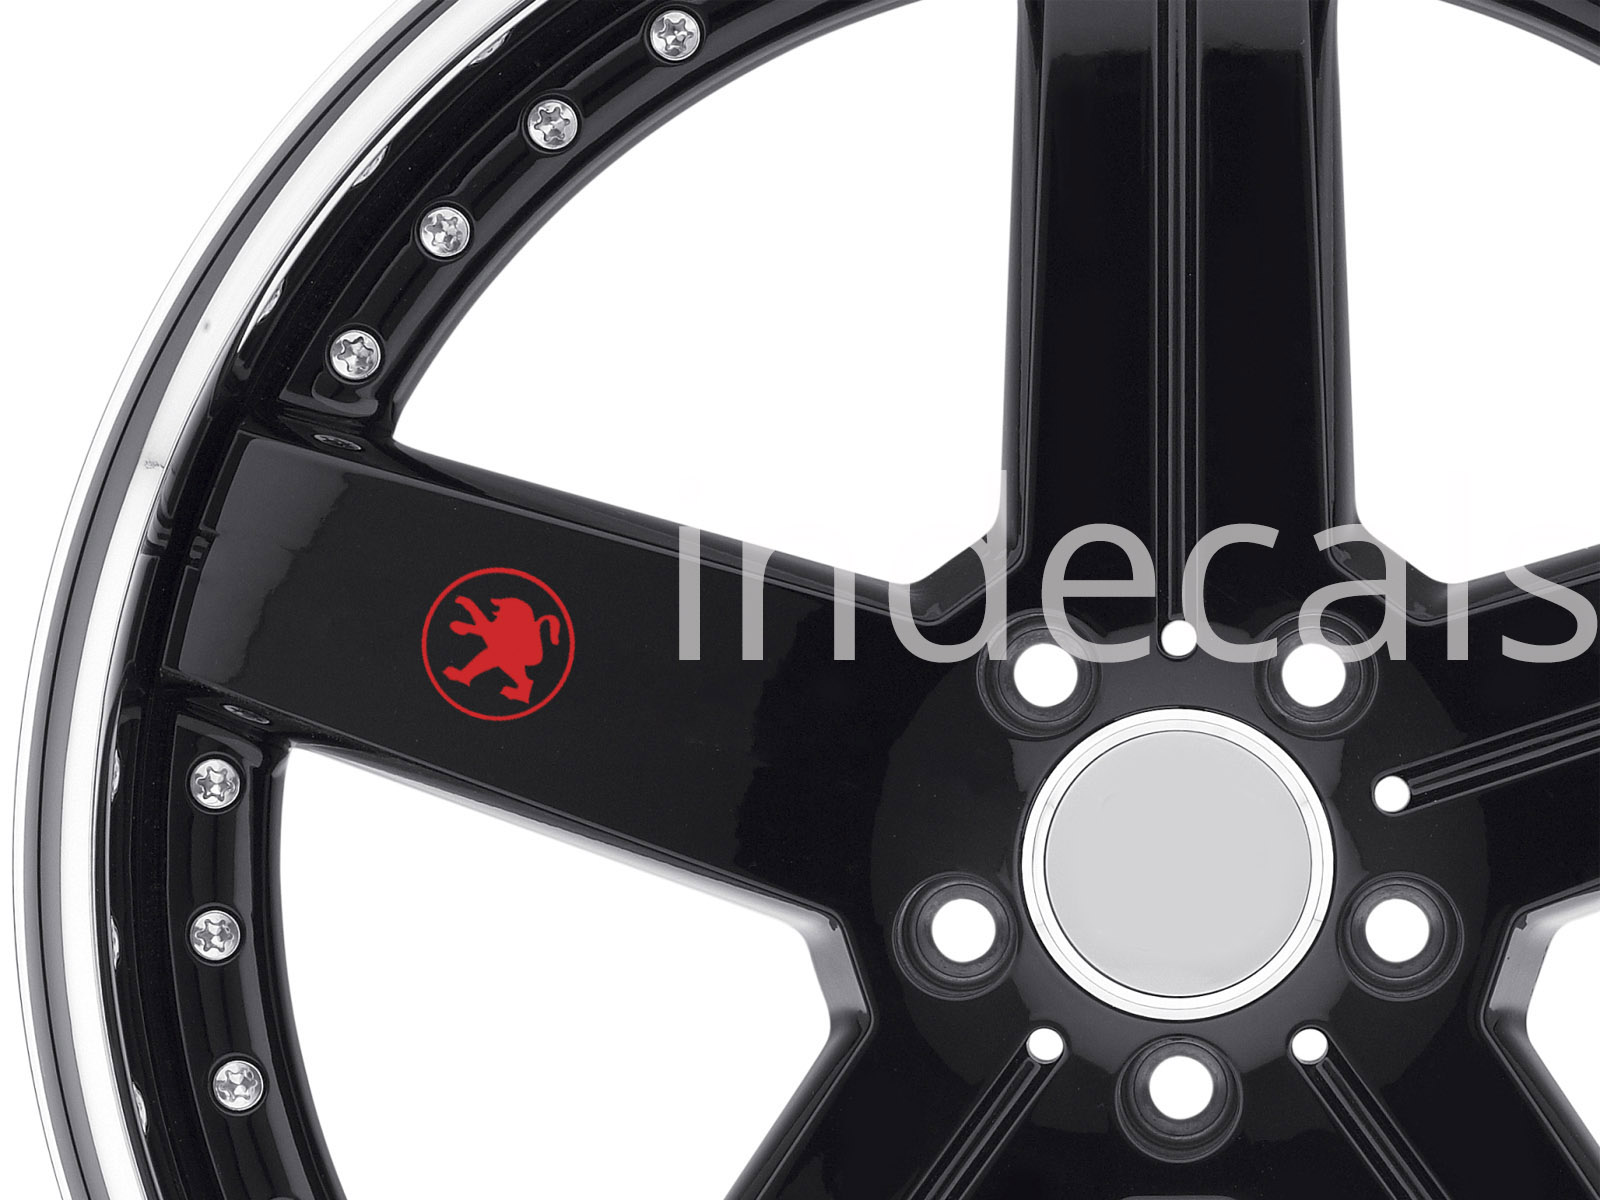 6 x Peugeot Stickers for Wheels - Red